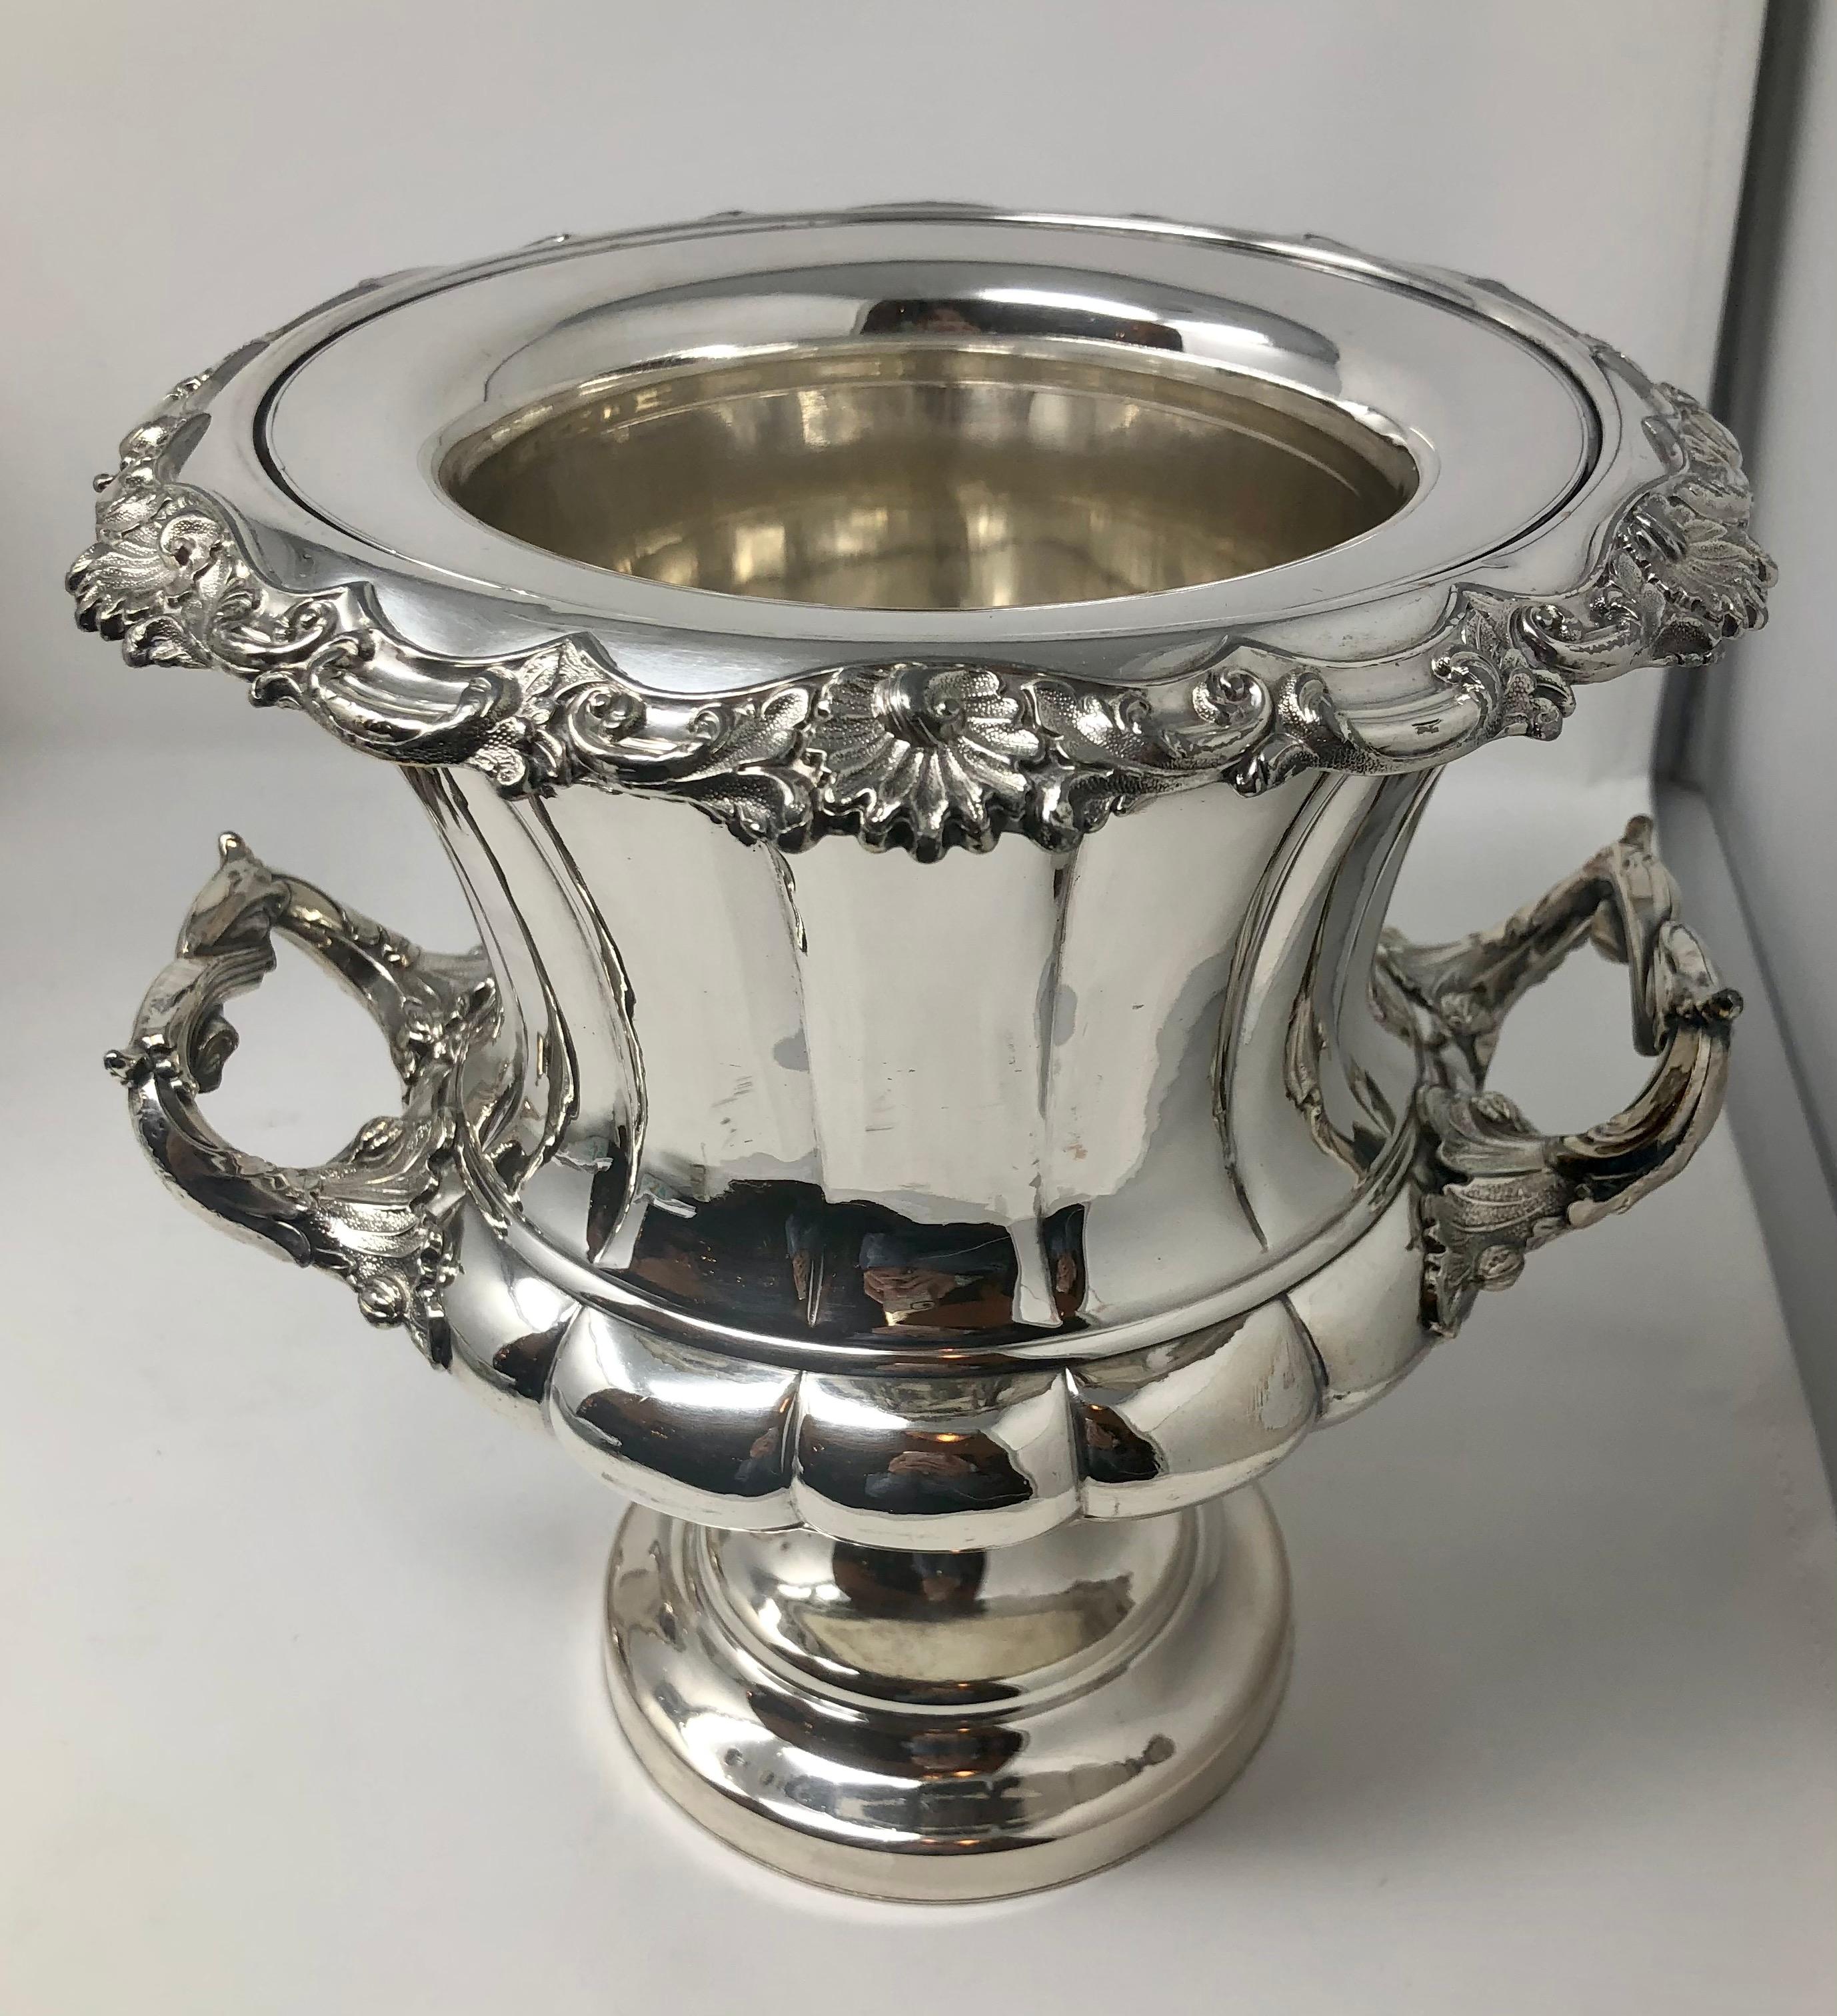 Pair of antique English Sheffield silver plated double walled champagne buckets, circa 1880-1890.